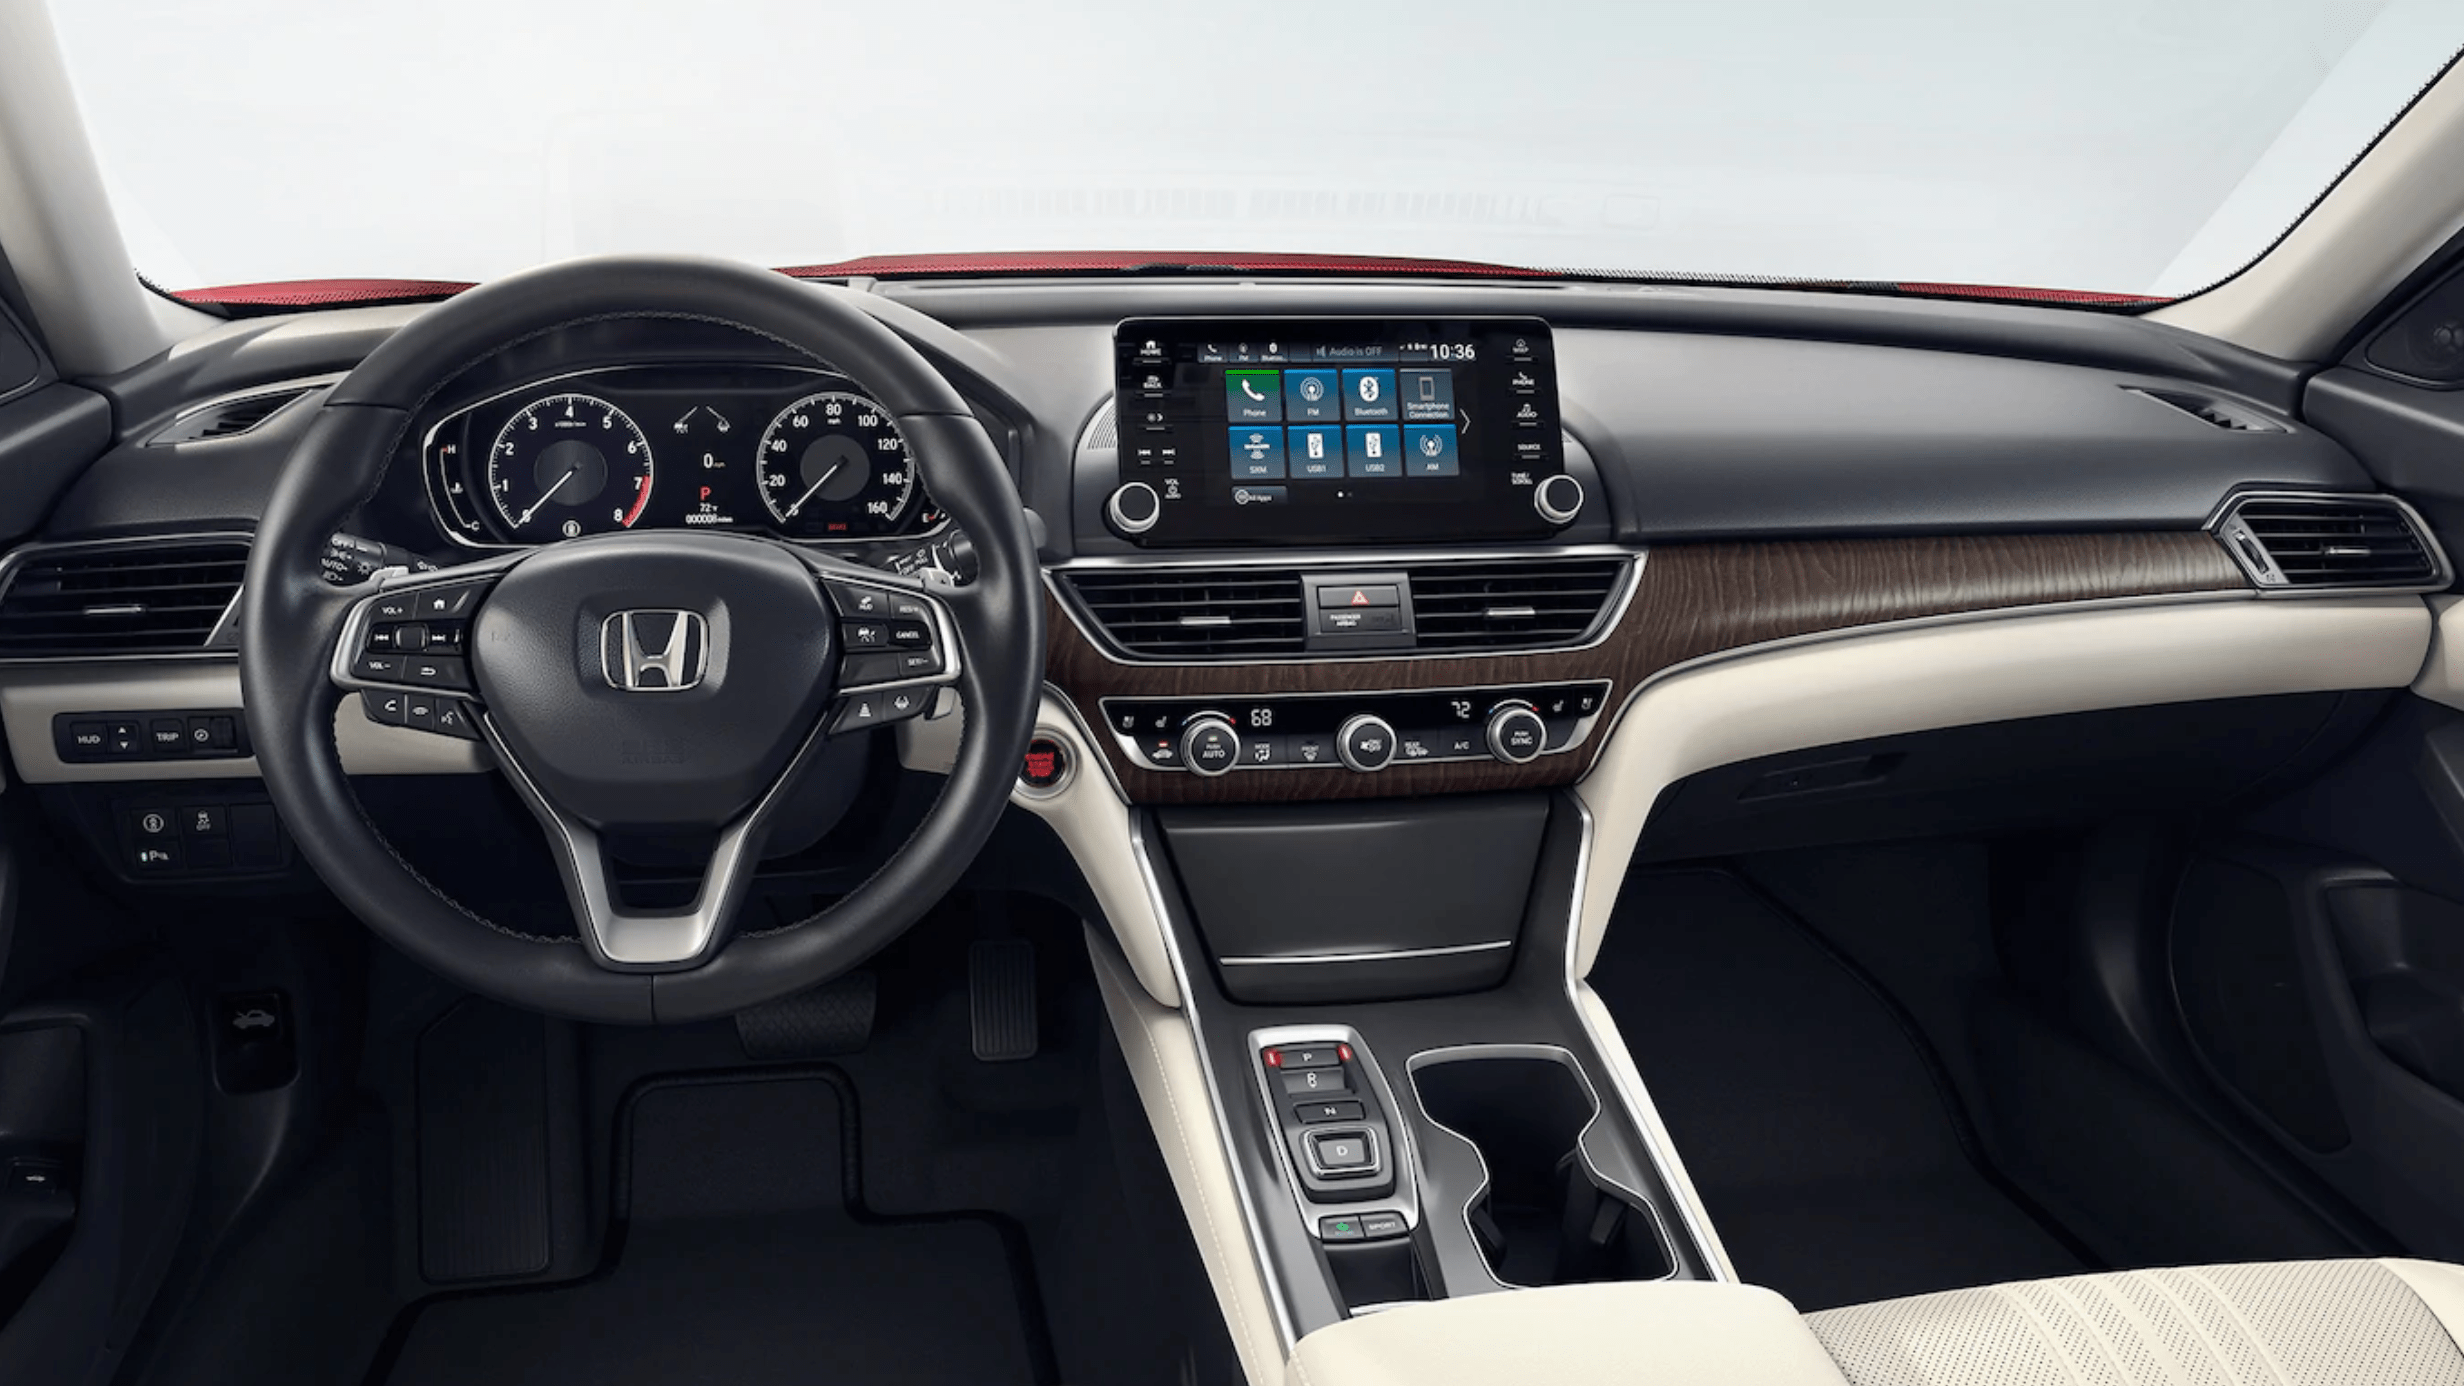 Honda’s New Interior Wants You To Keep Your Eyes On The Road